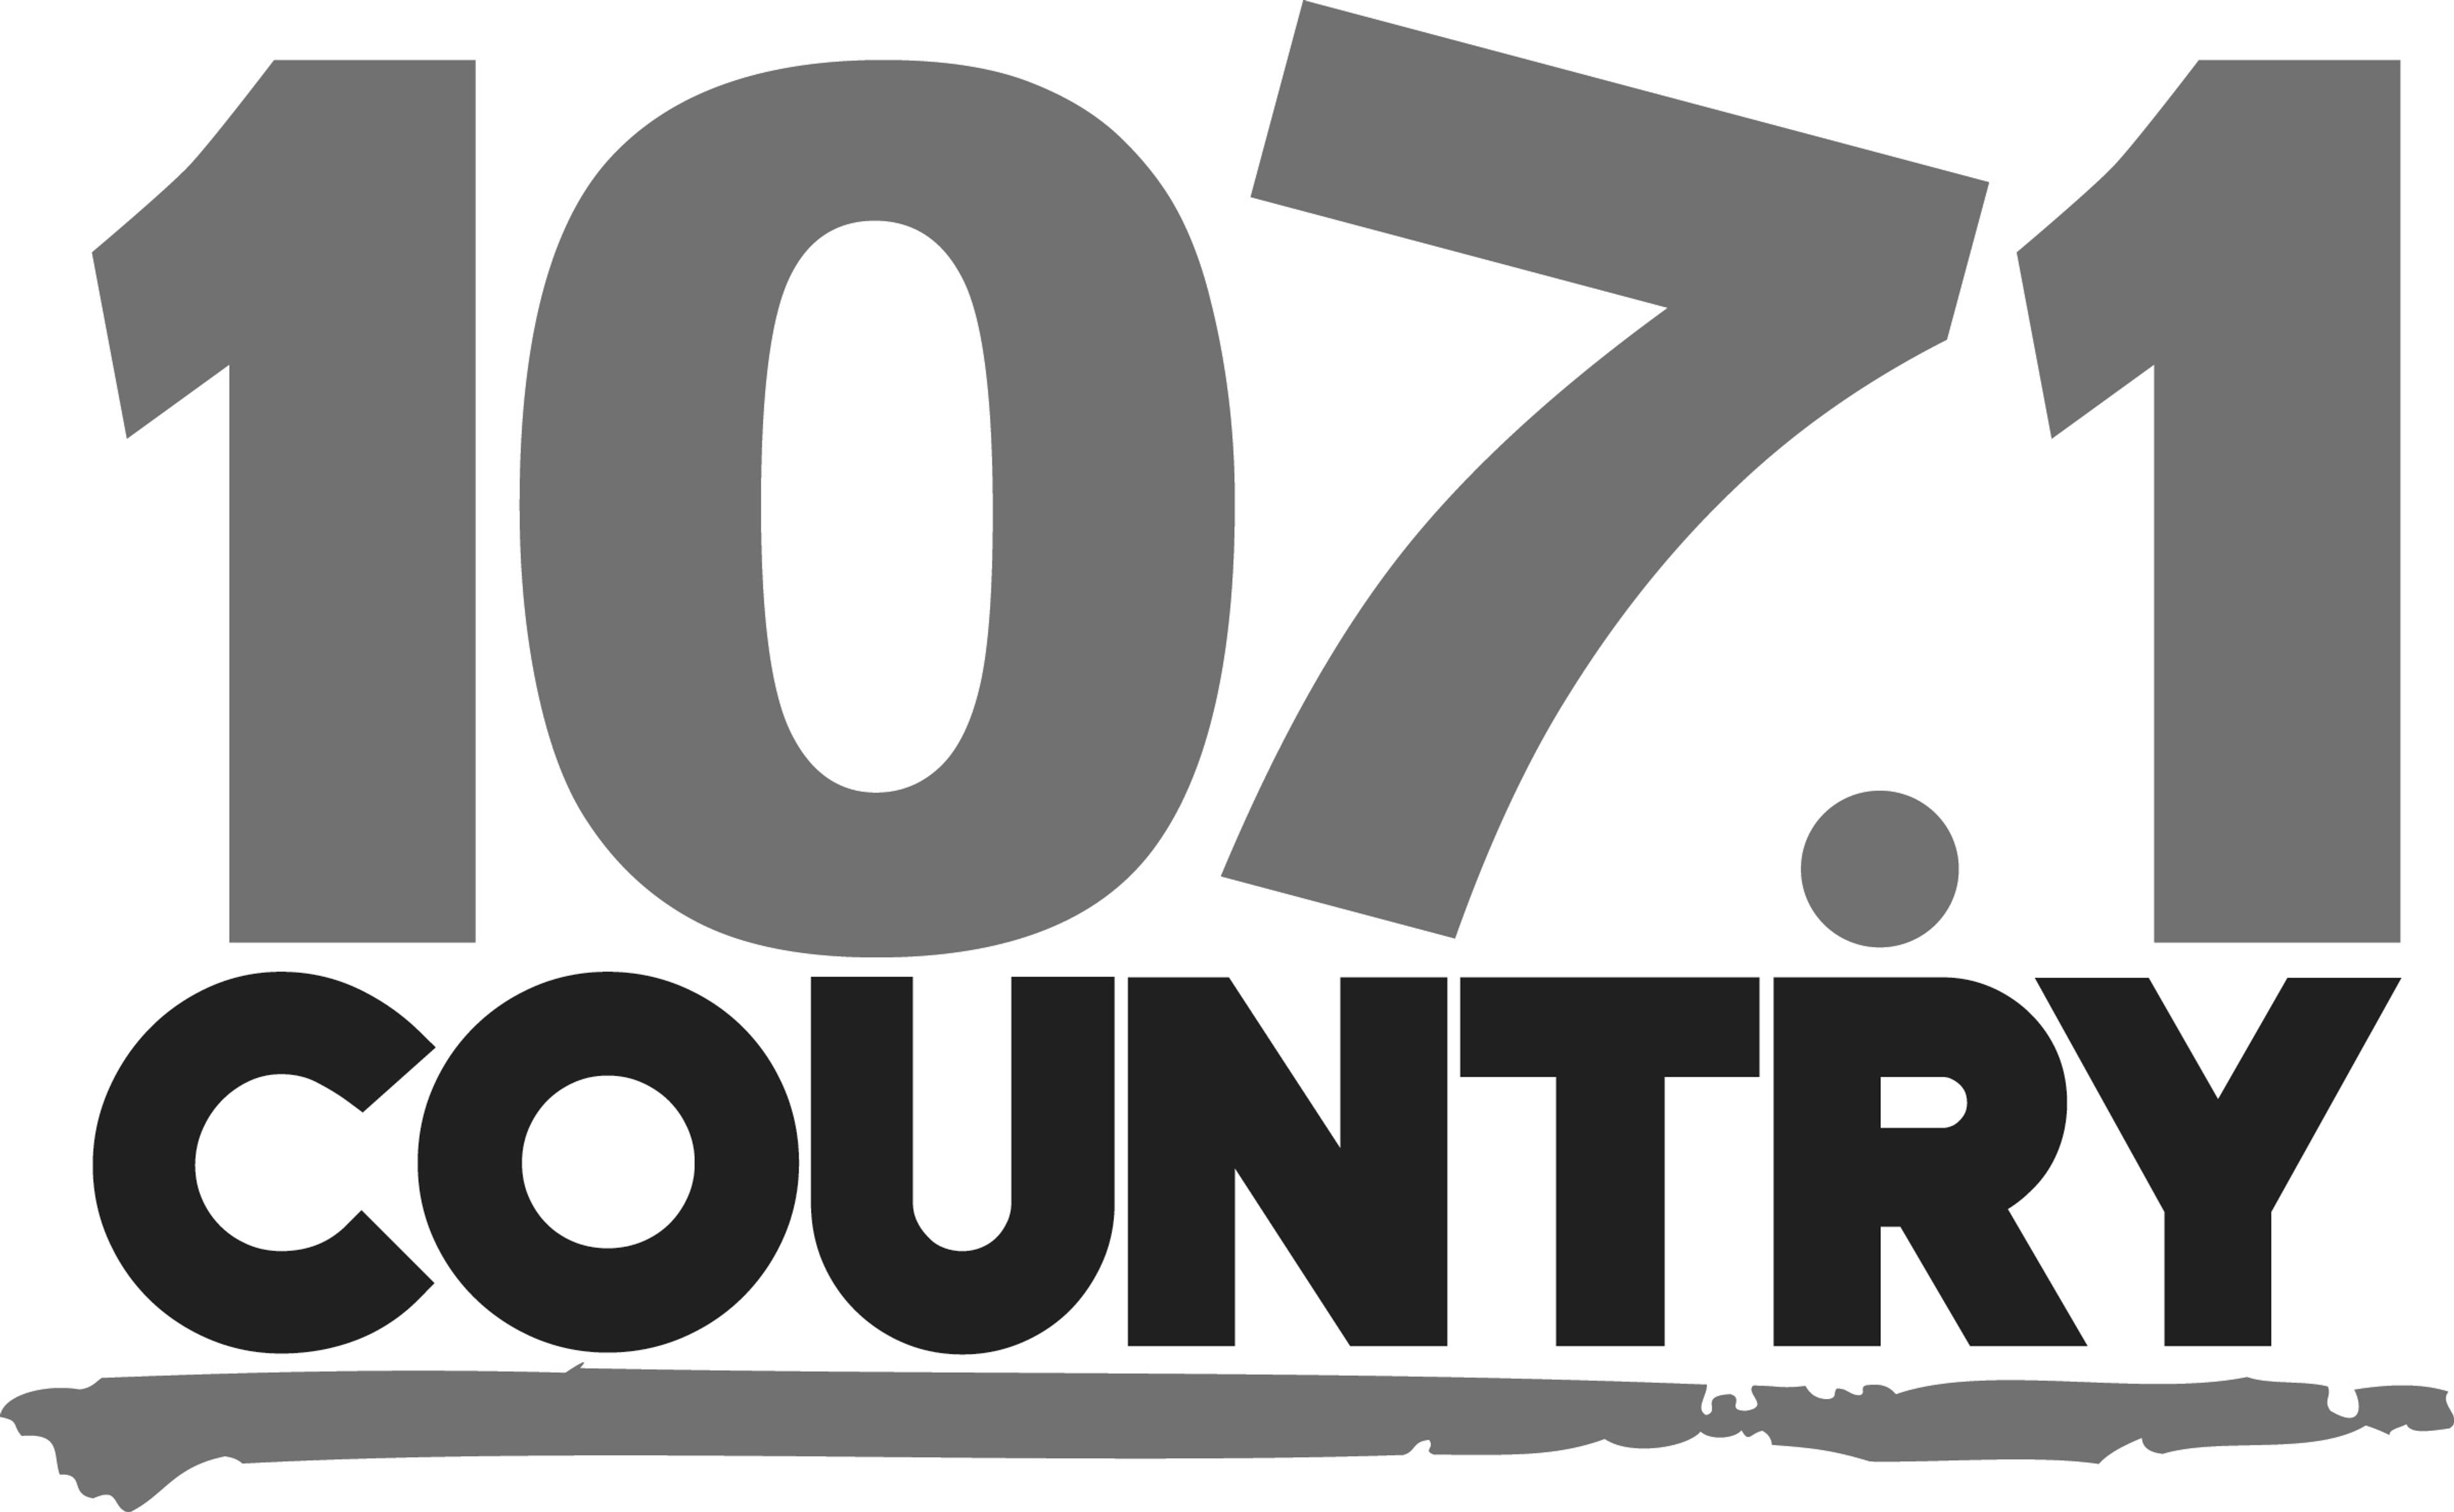 107.1 Country FM